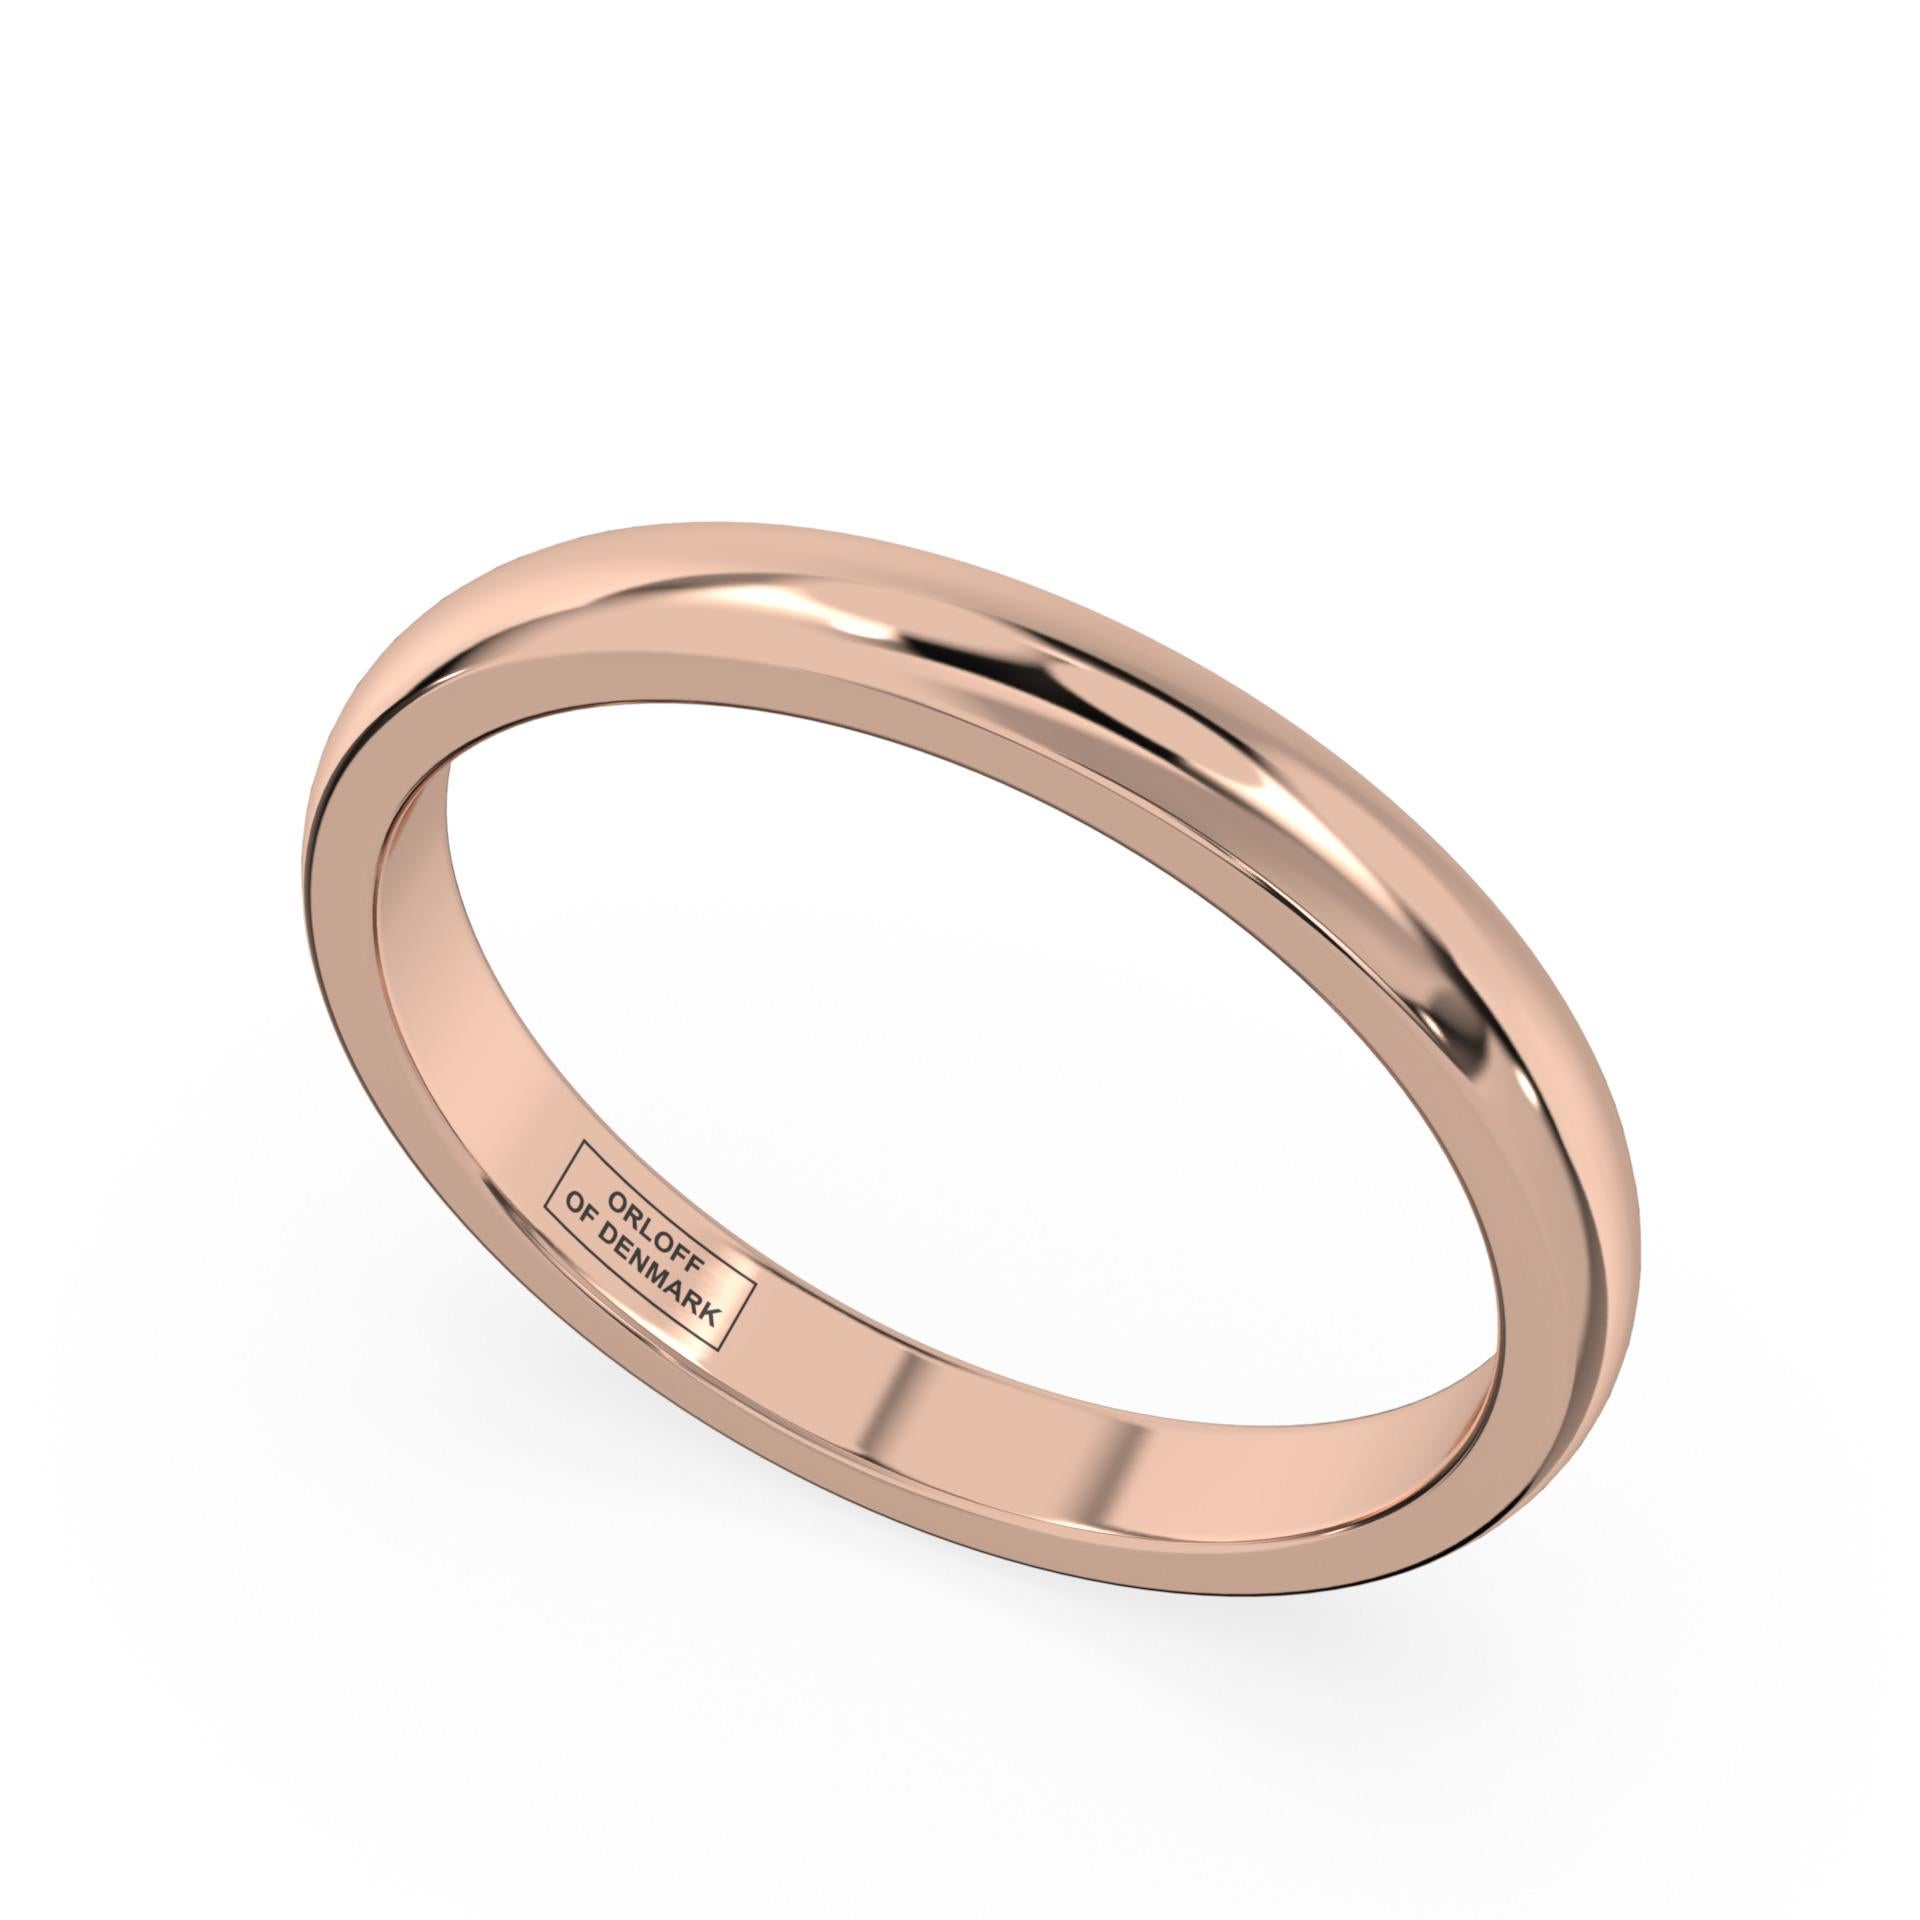 For Sale:  BY ORDER: Classic Band Ring in 18K White Gold, Yellow Gold, Rose Gold 8